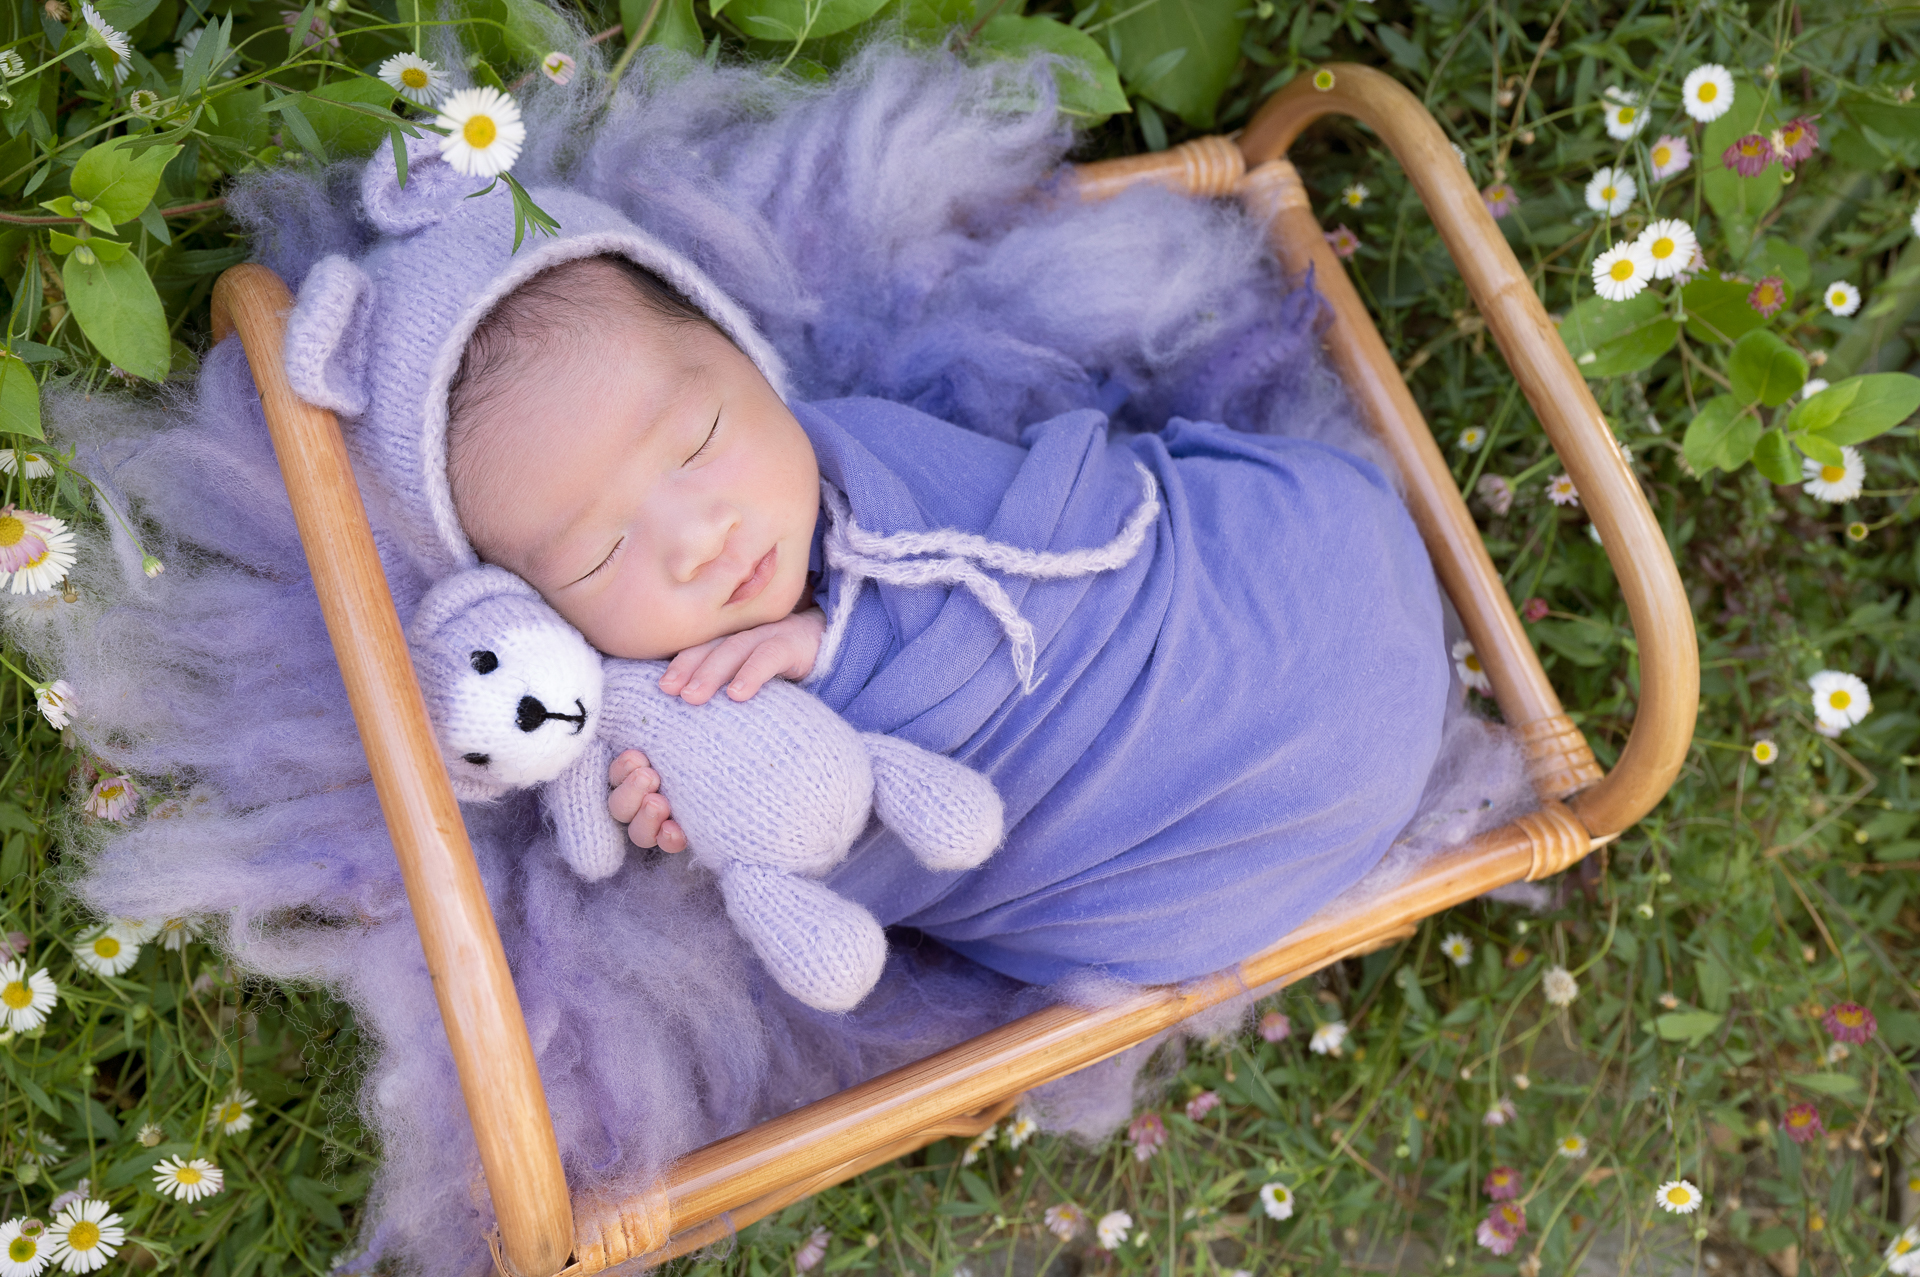 Newborn girl rests on wood prop outdoors while holding a small teddy bear with both hands. Purple hat, purple wrap.